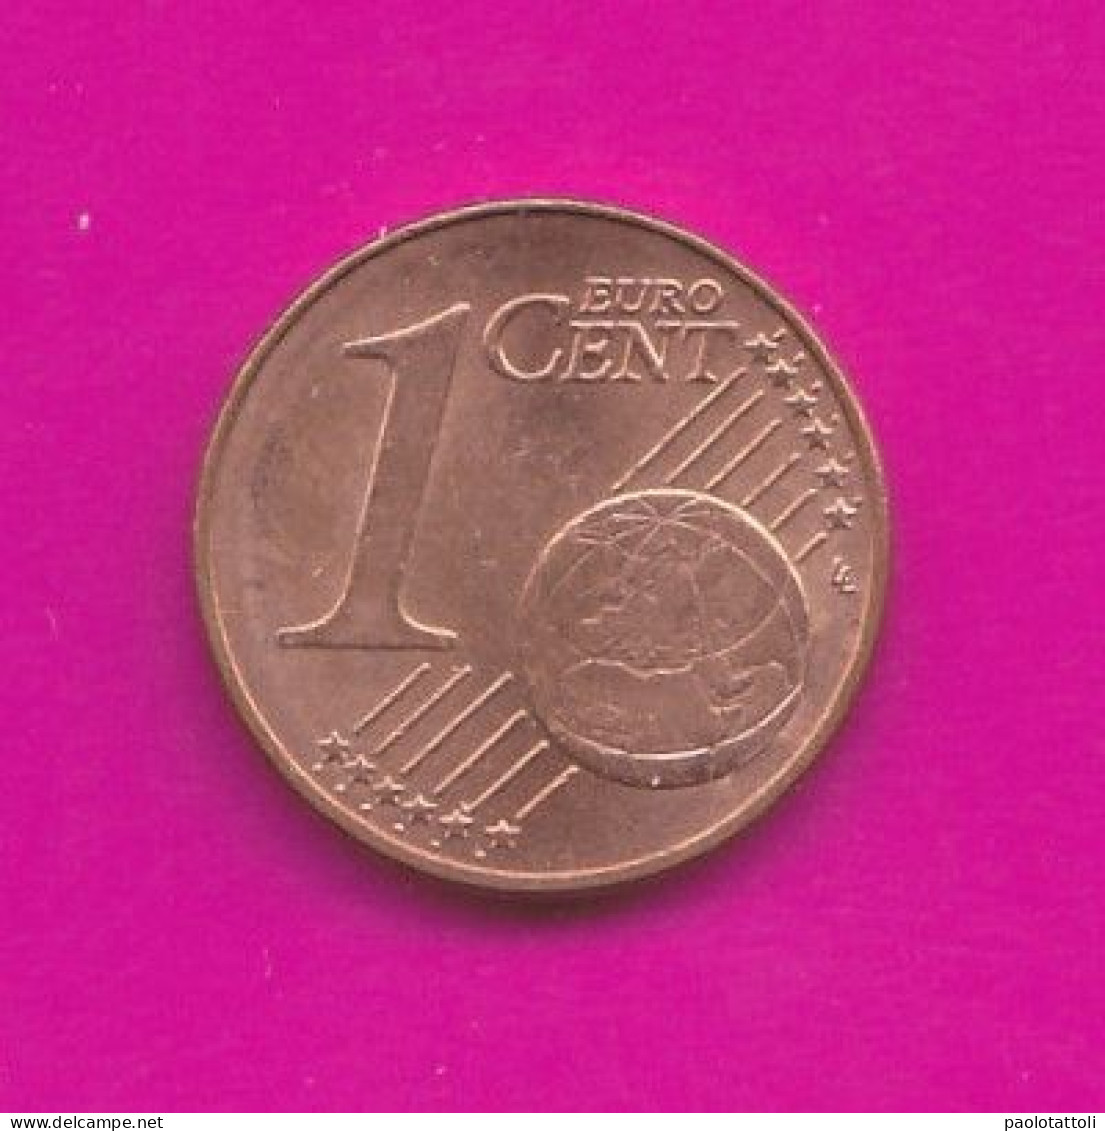 Germany, F 2018- 1 Euro Cent- Mint Of Stoccarda- Copper Plated Steel- Obverse Oak Leaf. Reverse Denomination- - Allemagne